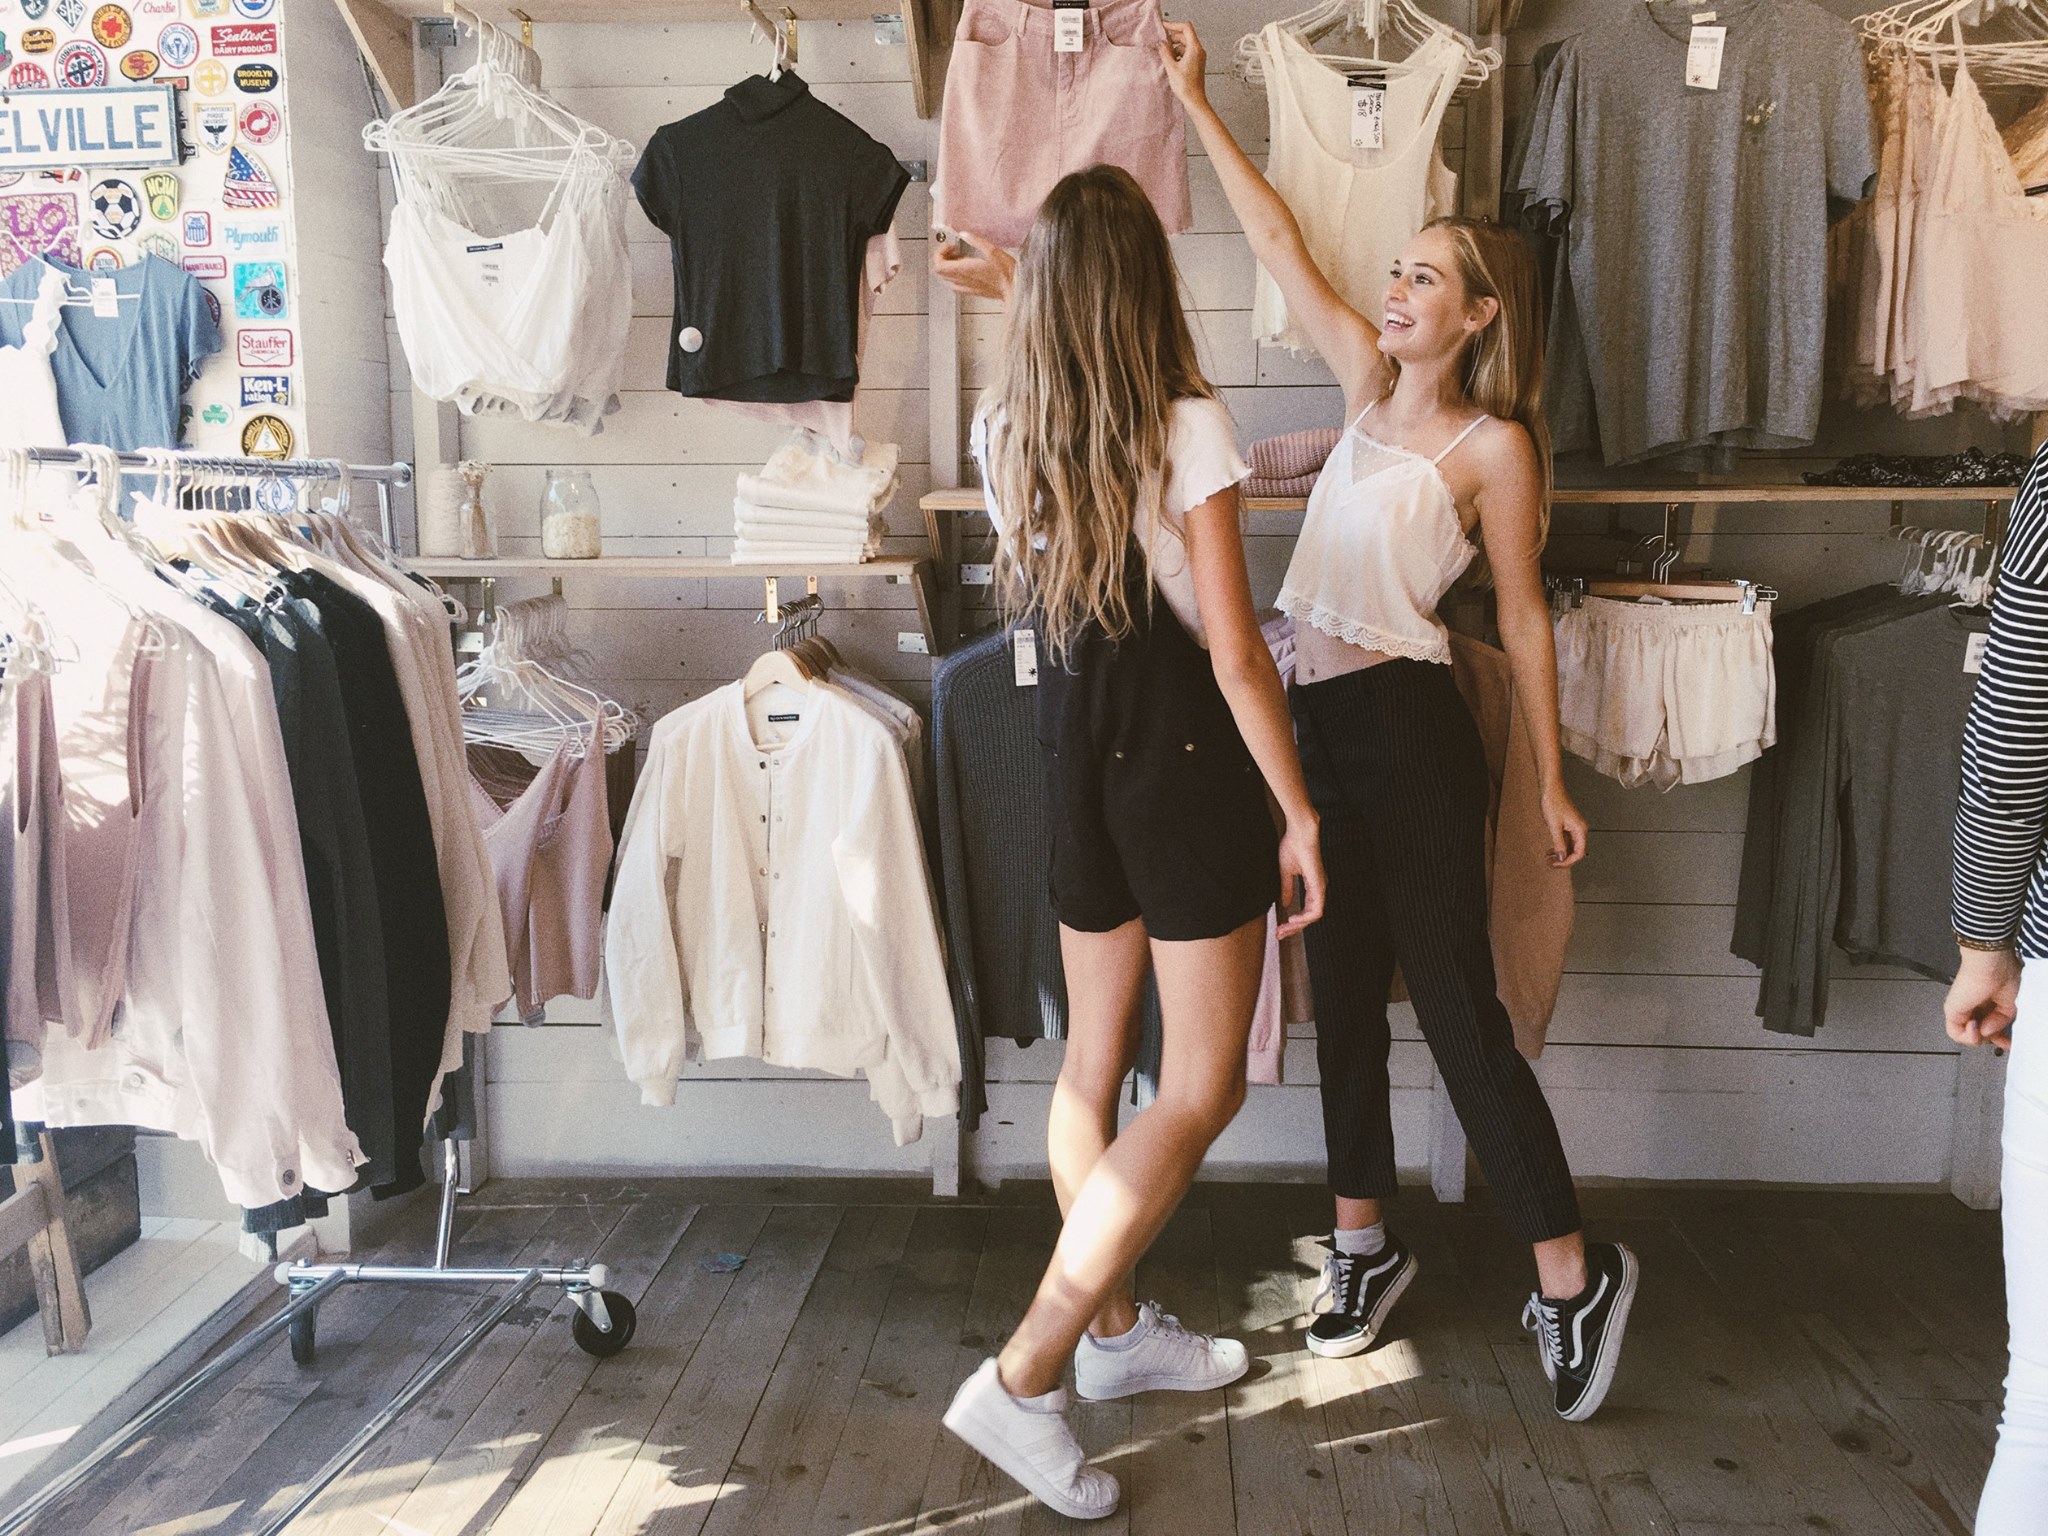 Brandy Melville: The Impact of Having Influence – The Looking Glass